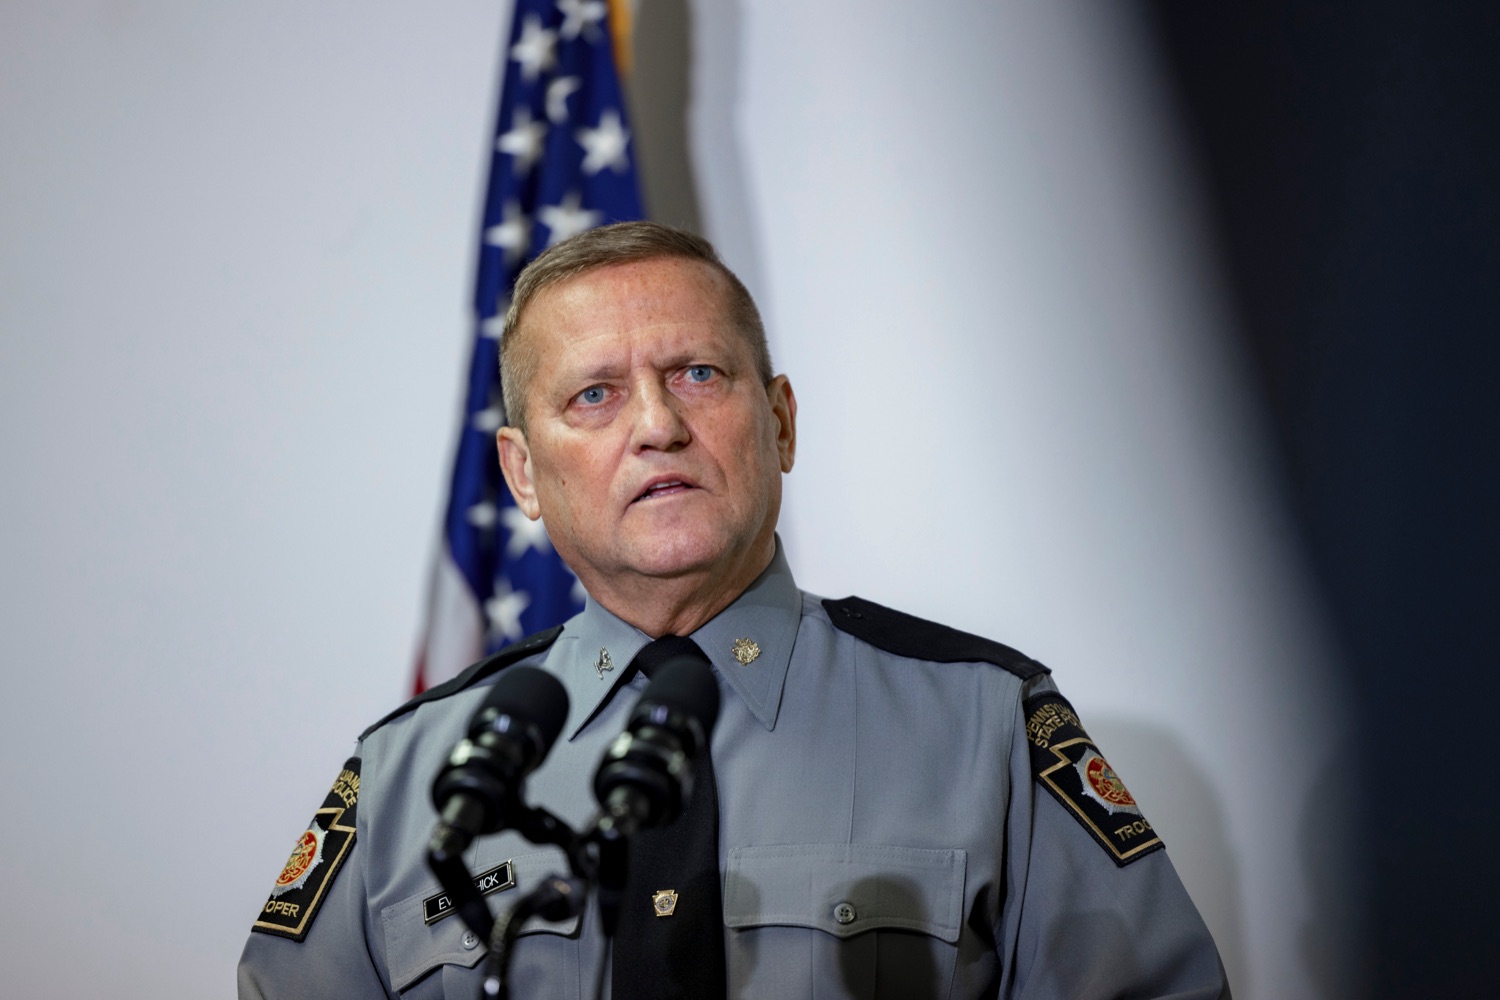 Colonel Robert Evanchick, Commissioner of the Pennsylvania State Police, speaks during a press conference to discuss the apprehension of Bryan C. Kohberger inside Monroe County District Attorney Office in Stroudsburg on Tuesday, January 3, 2023. Kohberger was taken into custody early Friday by members of Troop N and the Special Emergency Response Team at a home in Chestnuthill Township, in Monroe County, in connection to the homicides of four University of Idaho students on November 13.<br><a href="https://filesource.amperwave.net/commonwealthofpa/photo/22481_PSP_Kohberger_NK_014.JPG" target="_blank">⇣ Download Photo</a>